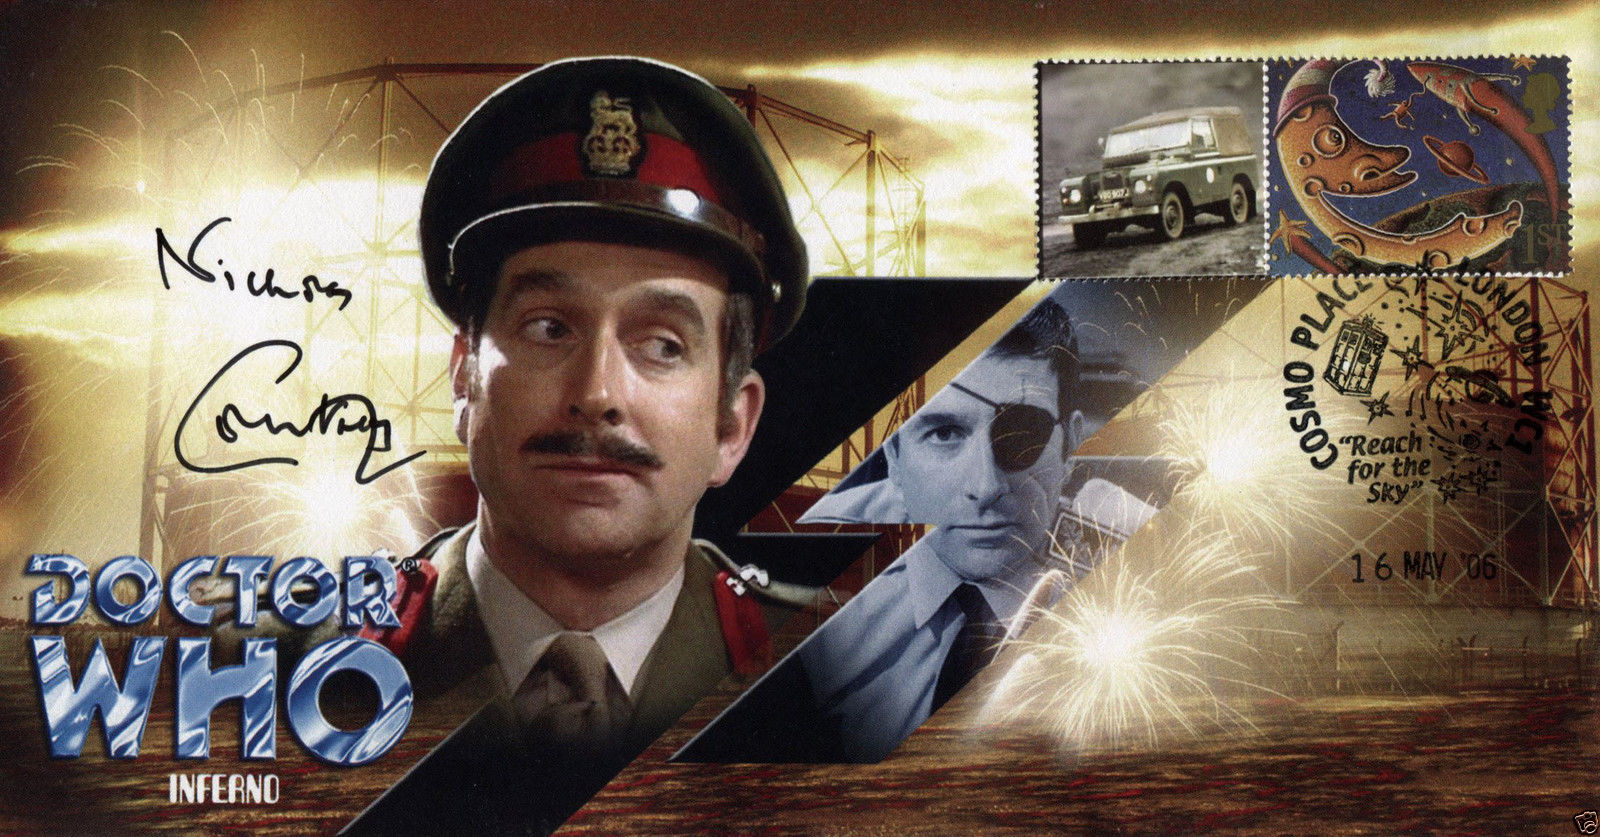 Doctor Who Inferno Collectible Stamp Cover Signed by NICHOLAS COURTNEY